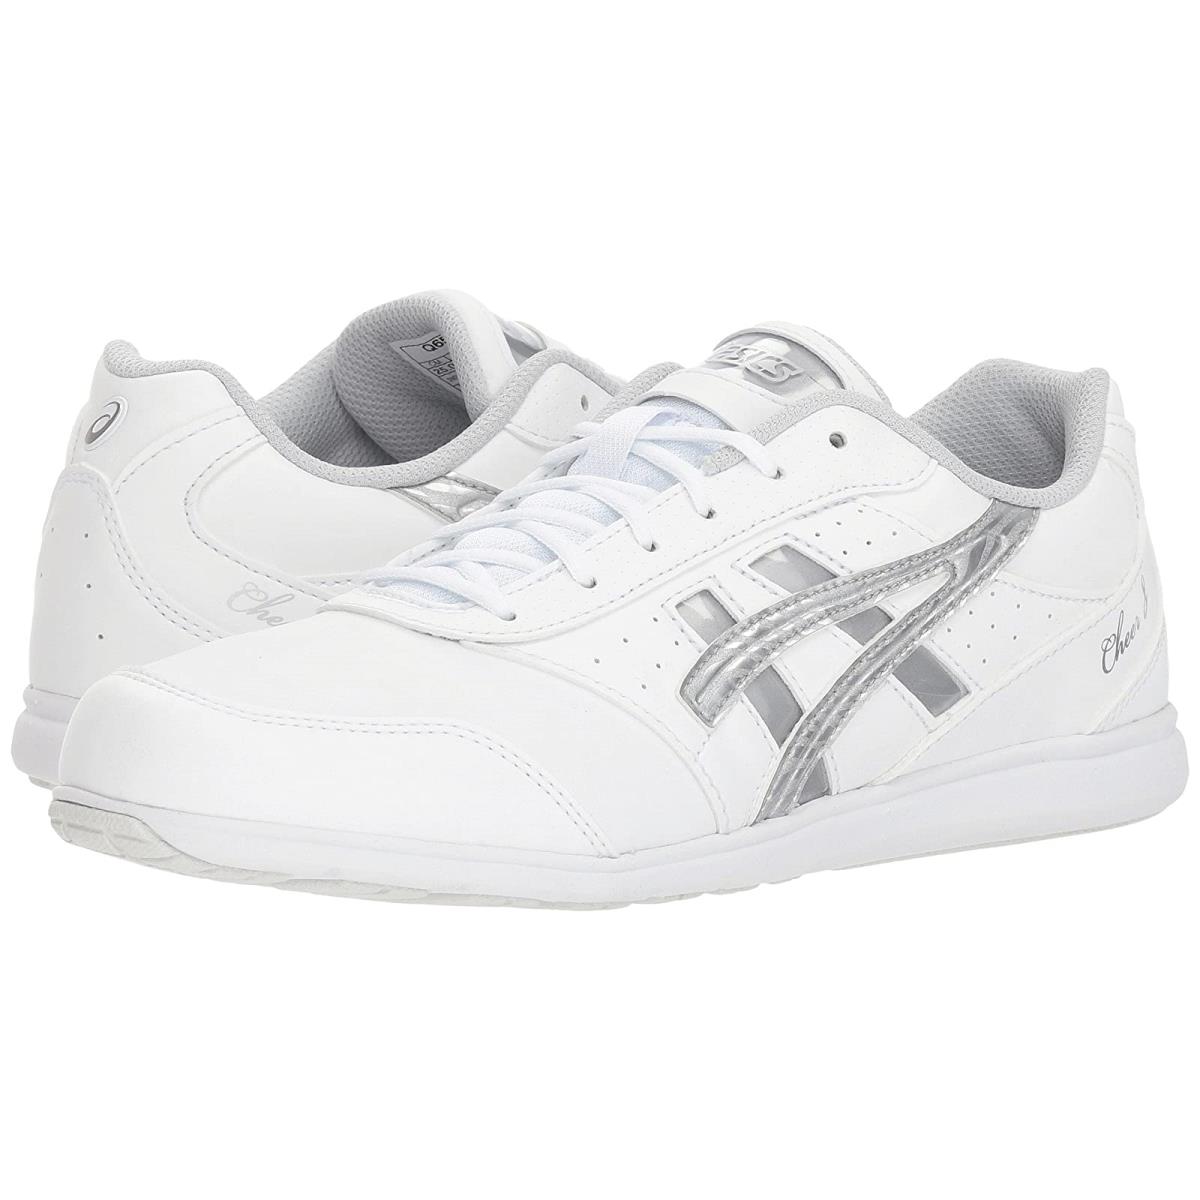 Woman`s Sneakers Athletic Shoes Asics Cheer 8 White/Silver/Exchange